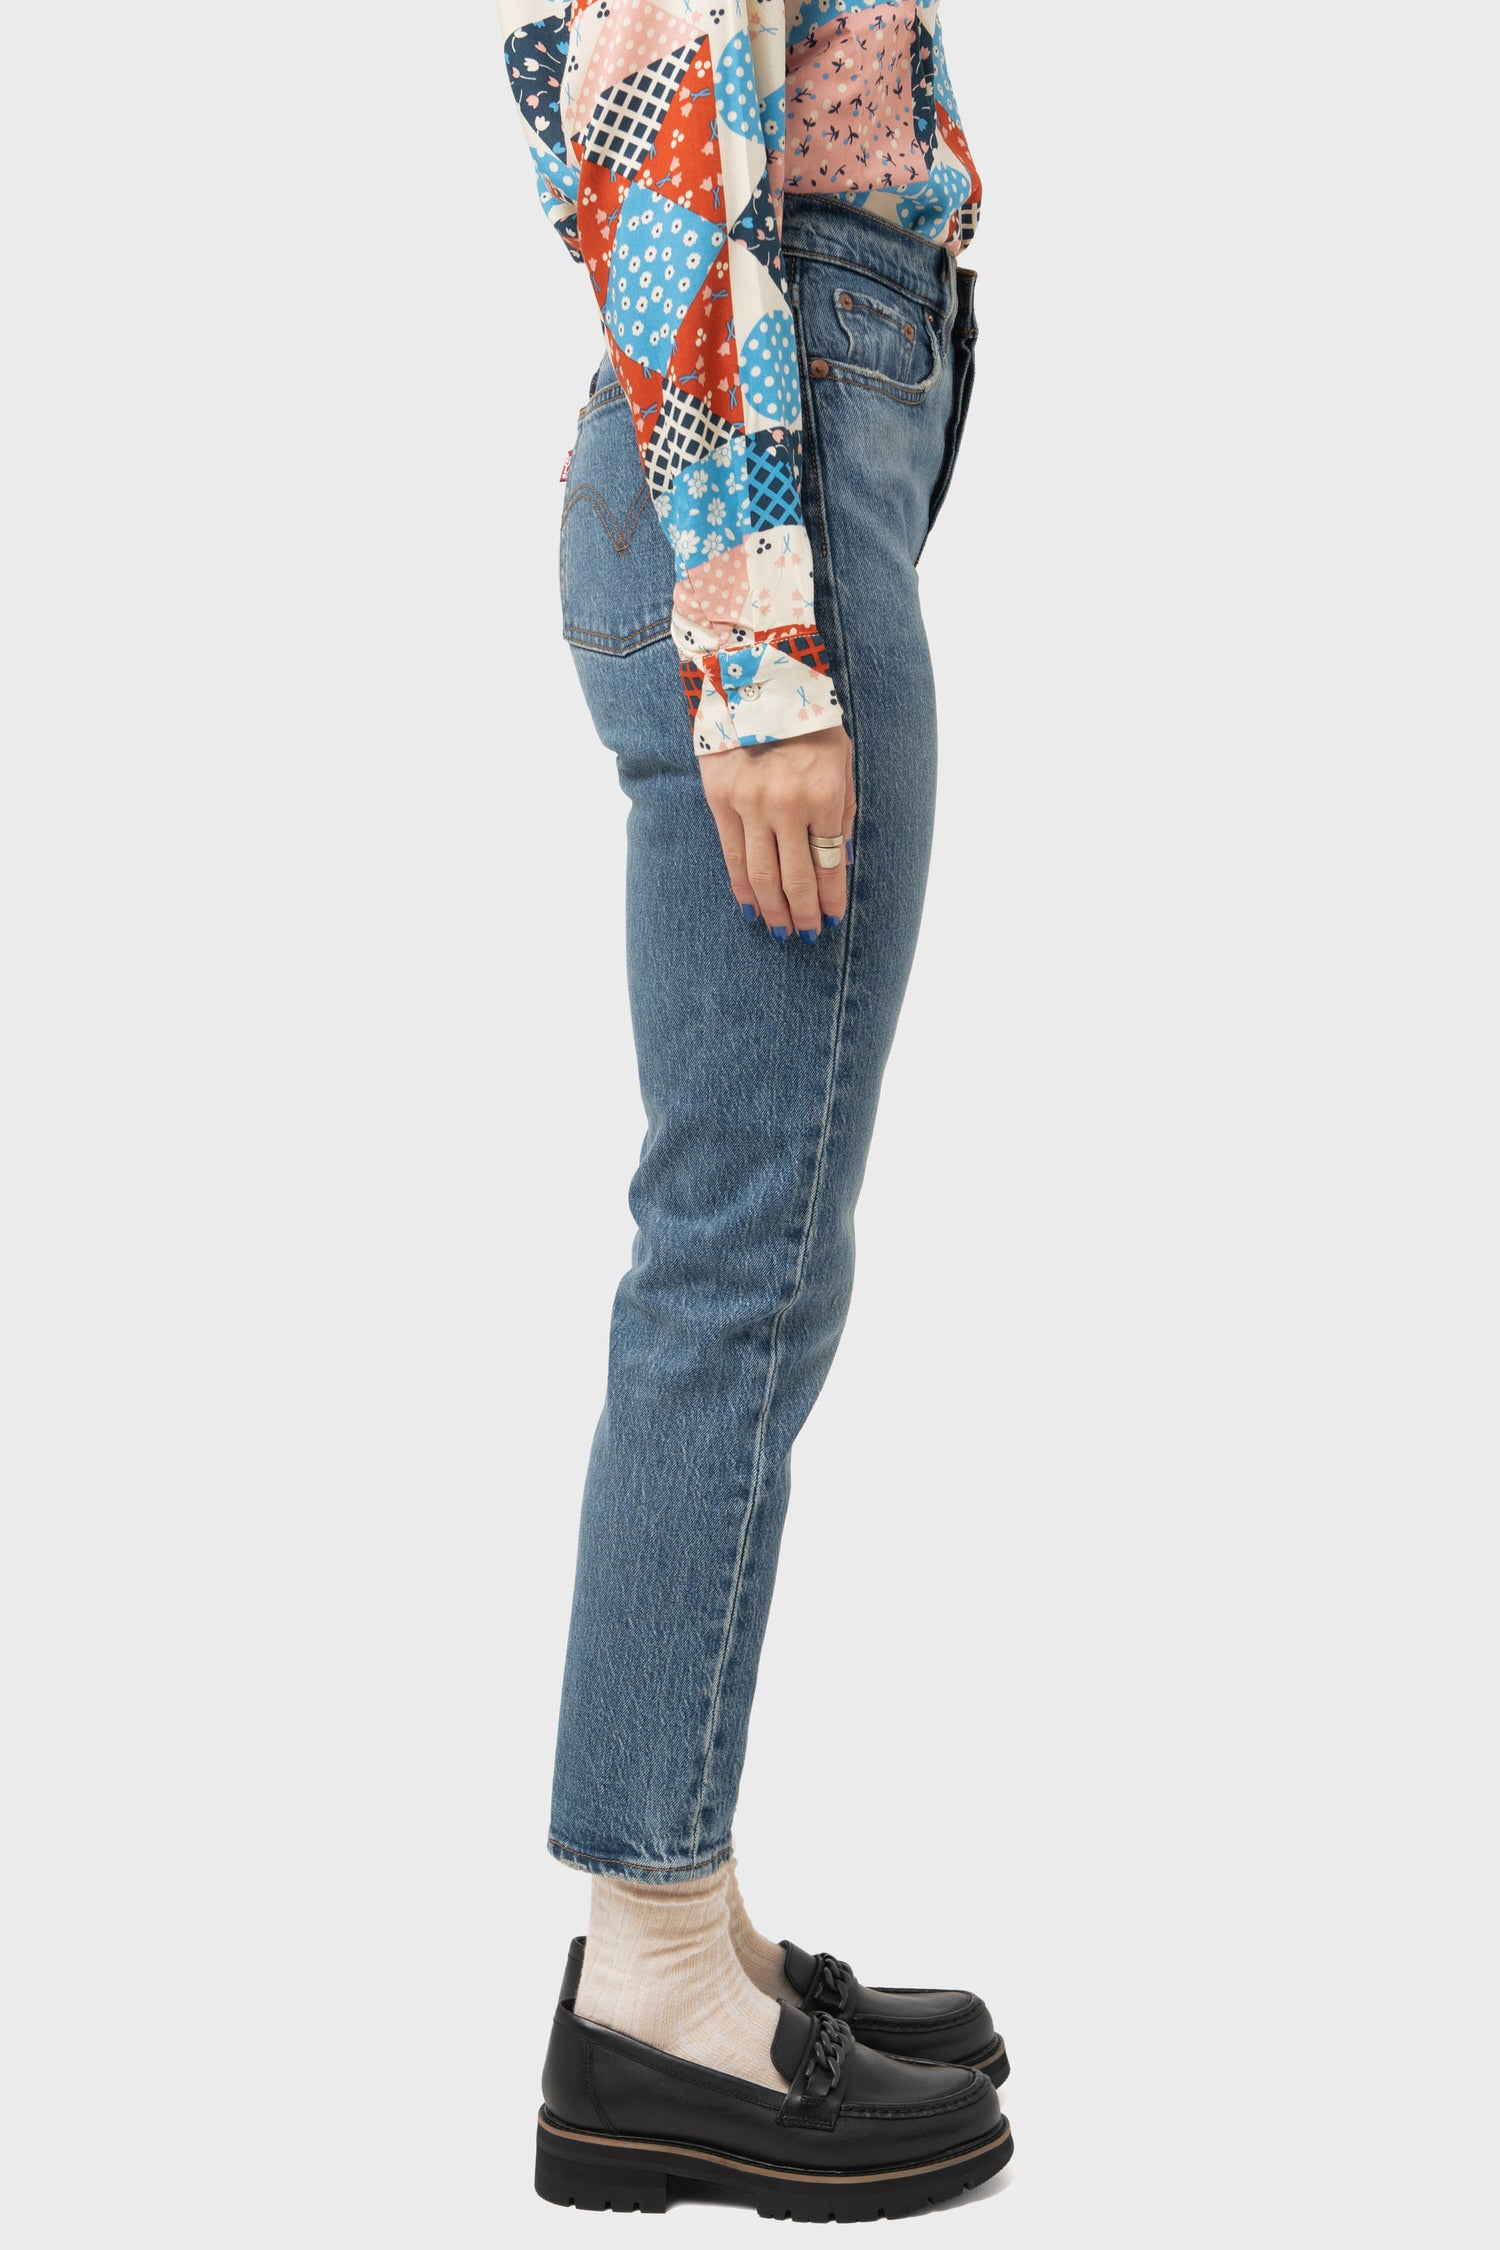 Women's Levi's Wedgie Icon Fit in These Dreams